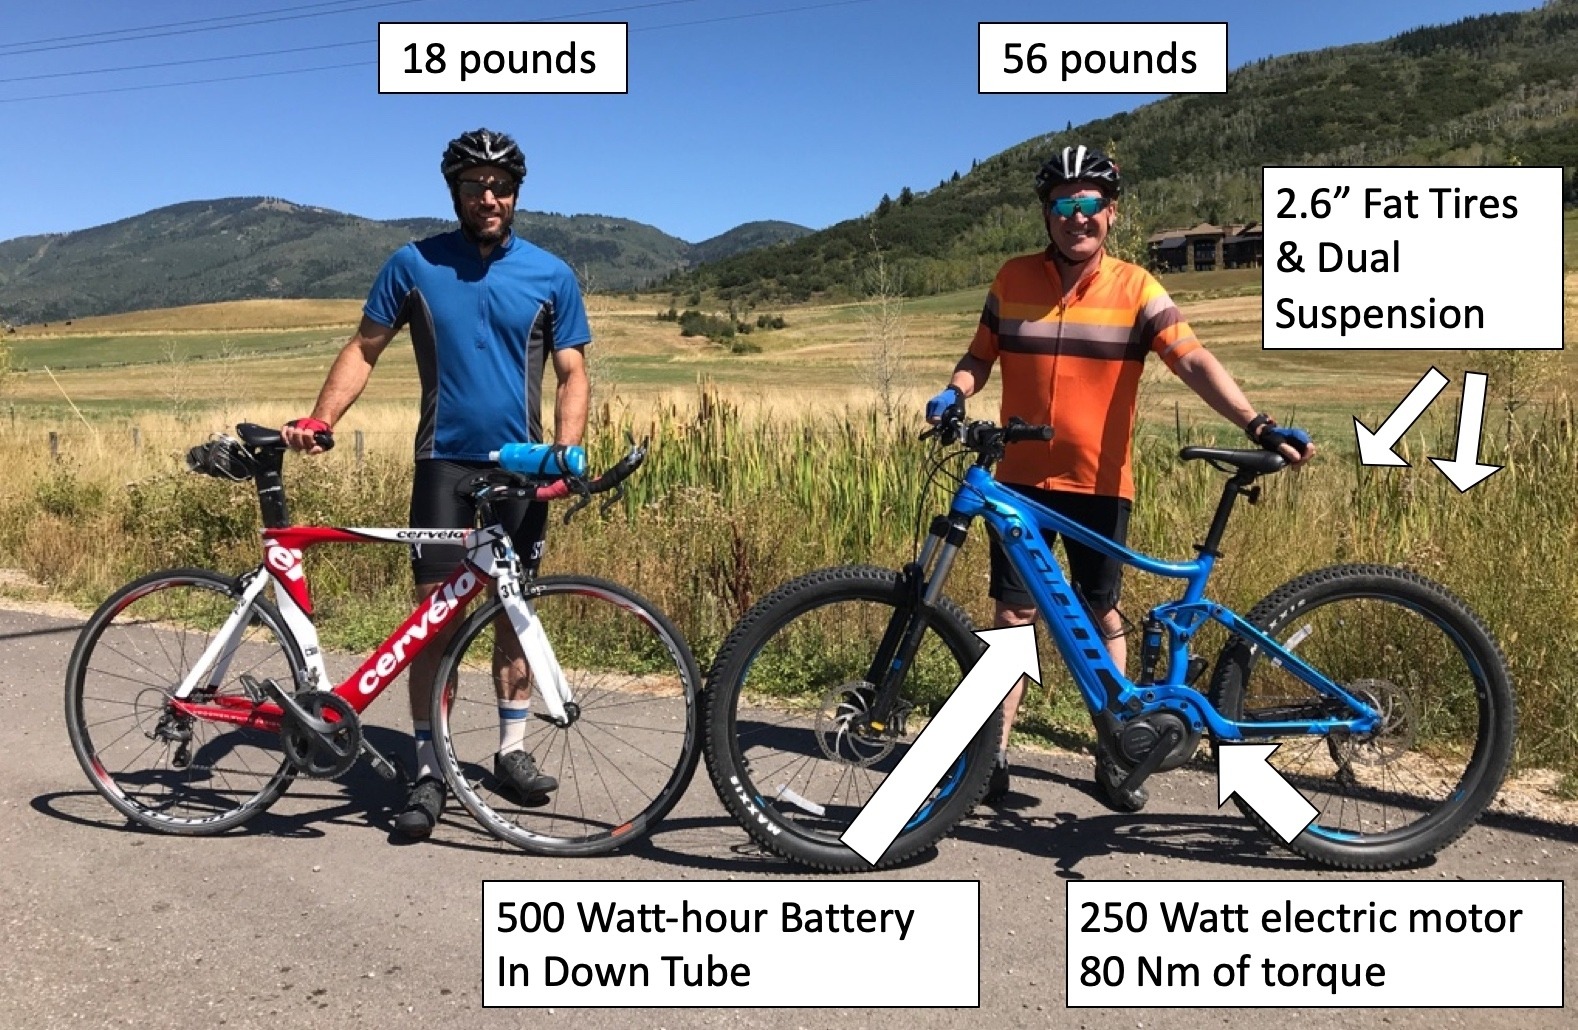 Elite athlete TJ Thrasher, left, with a conventional bike and the author, right, with an e-bike.  